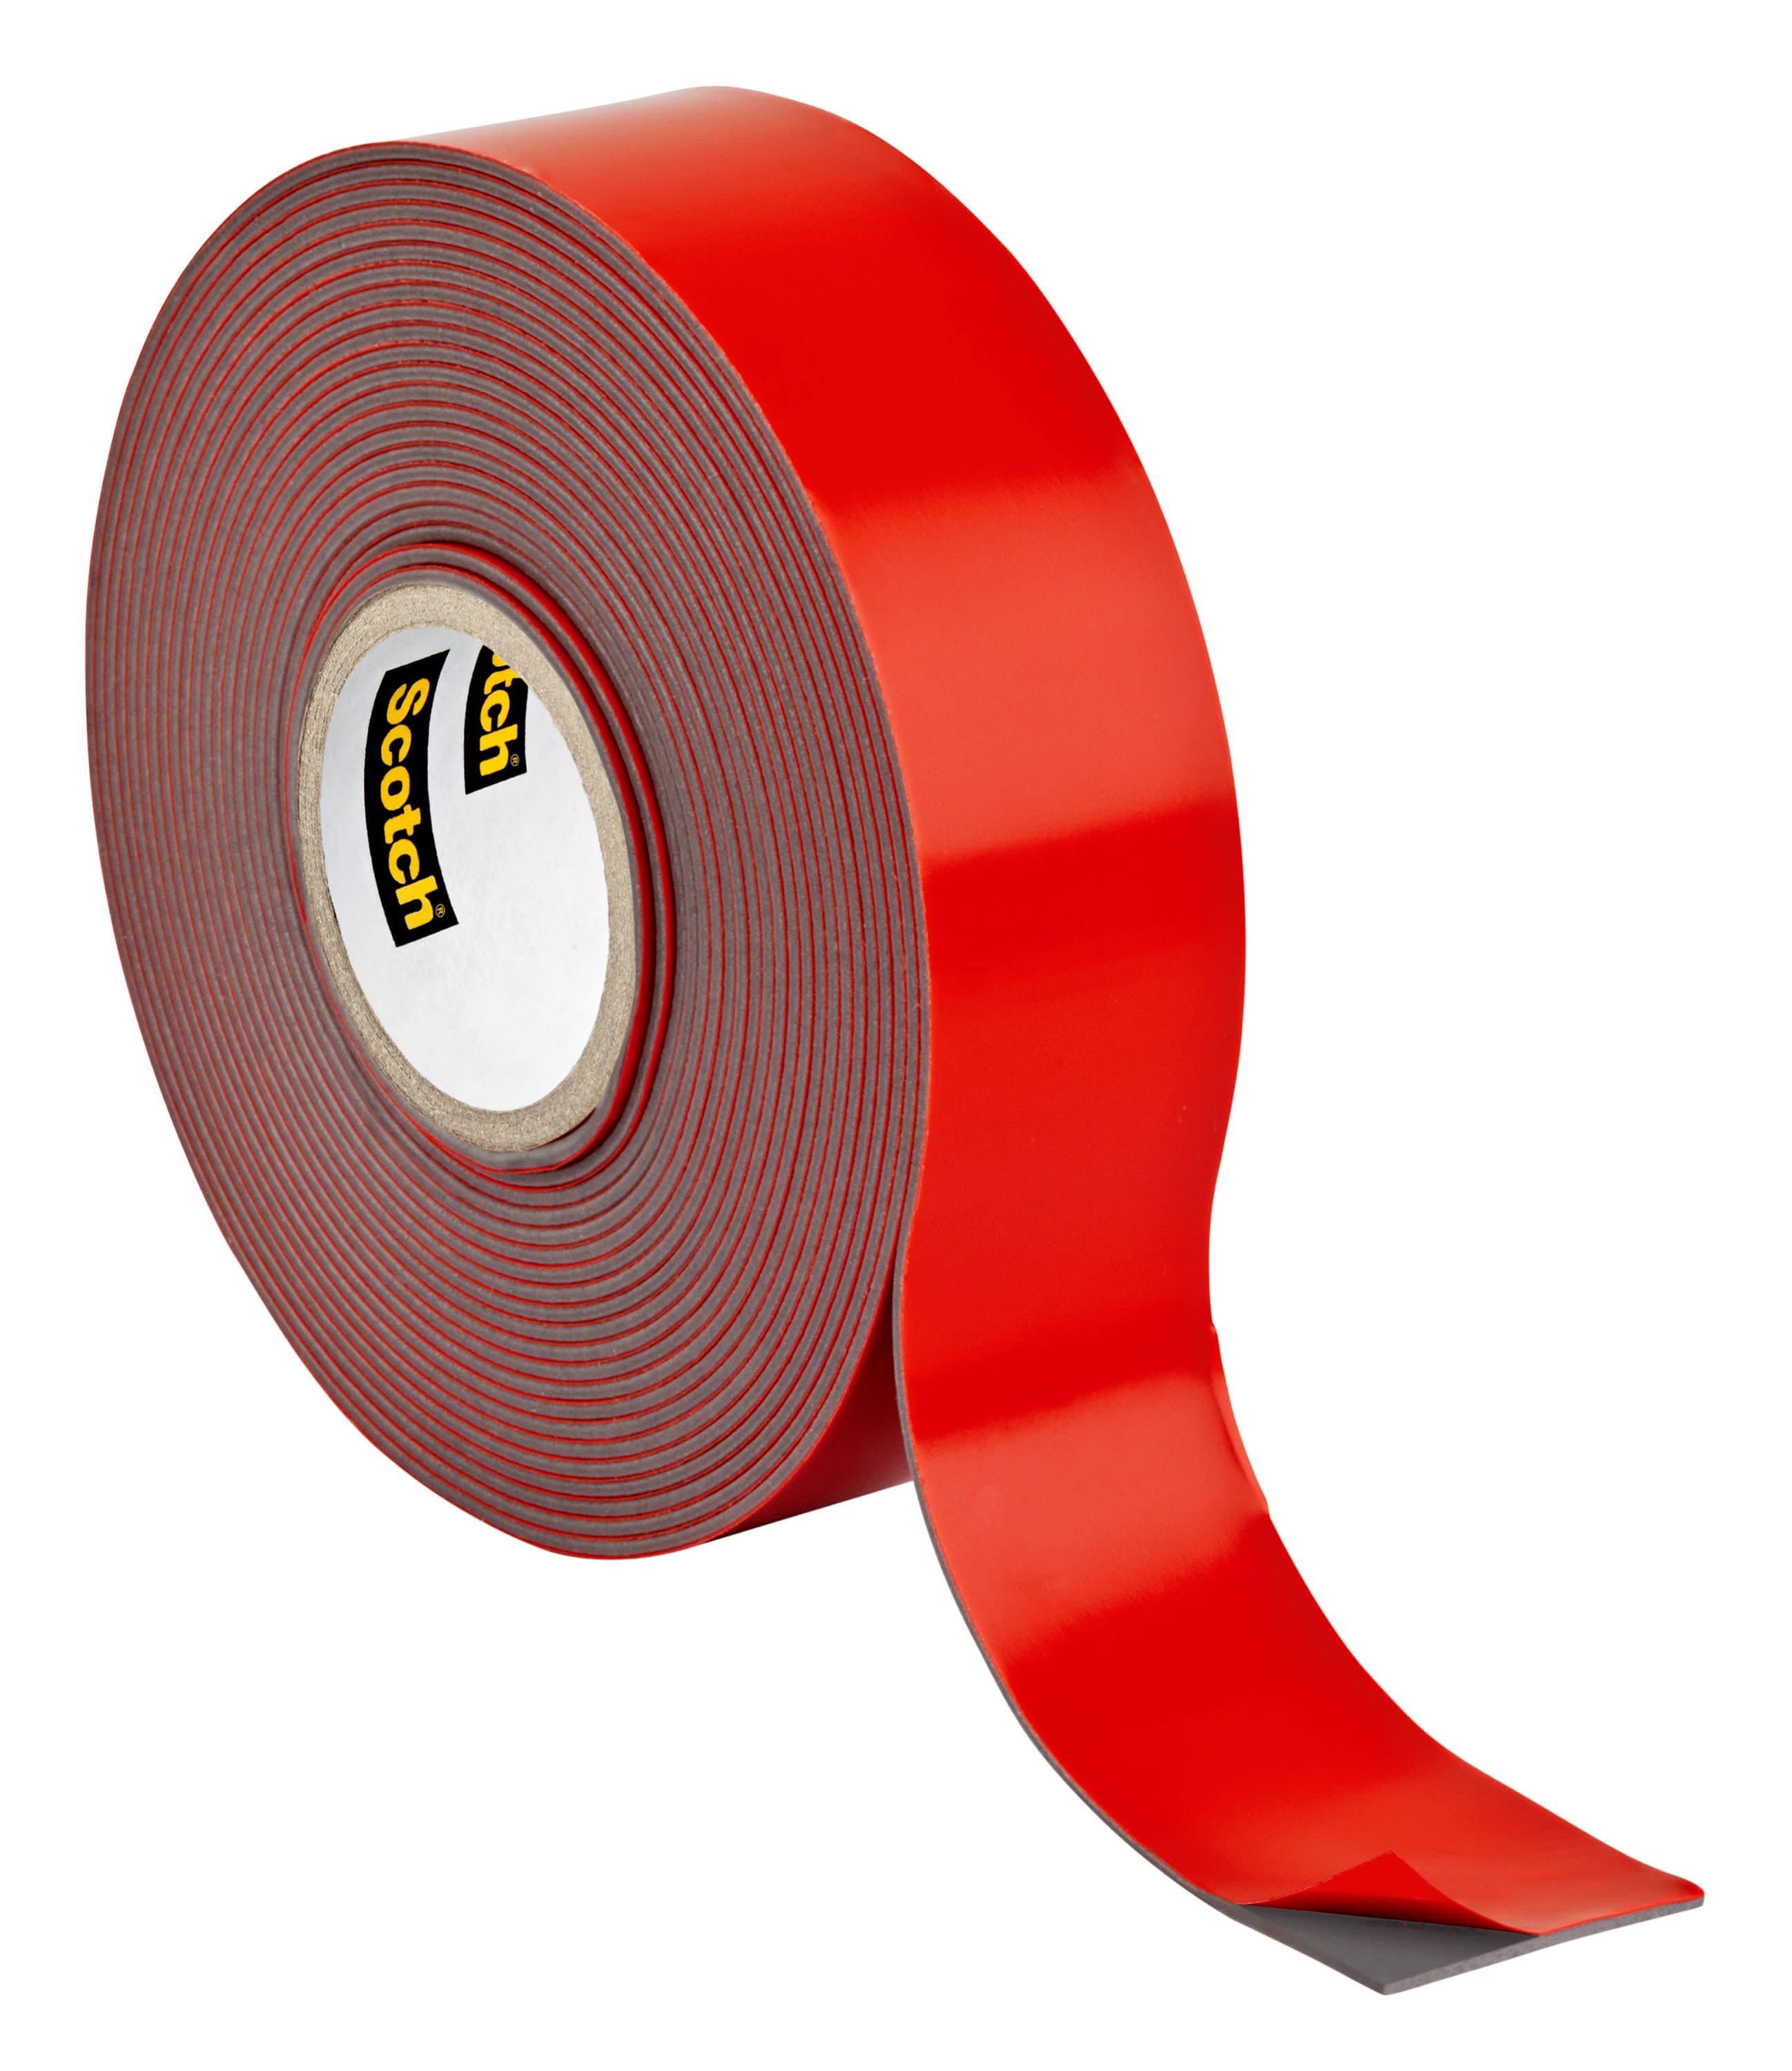 Double Sided Outdoor Name Plate Adhesive Tape